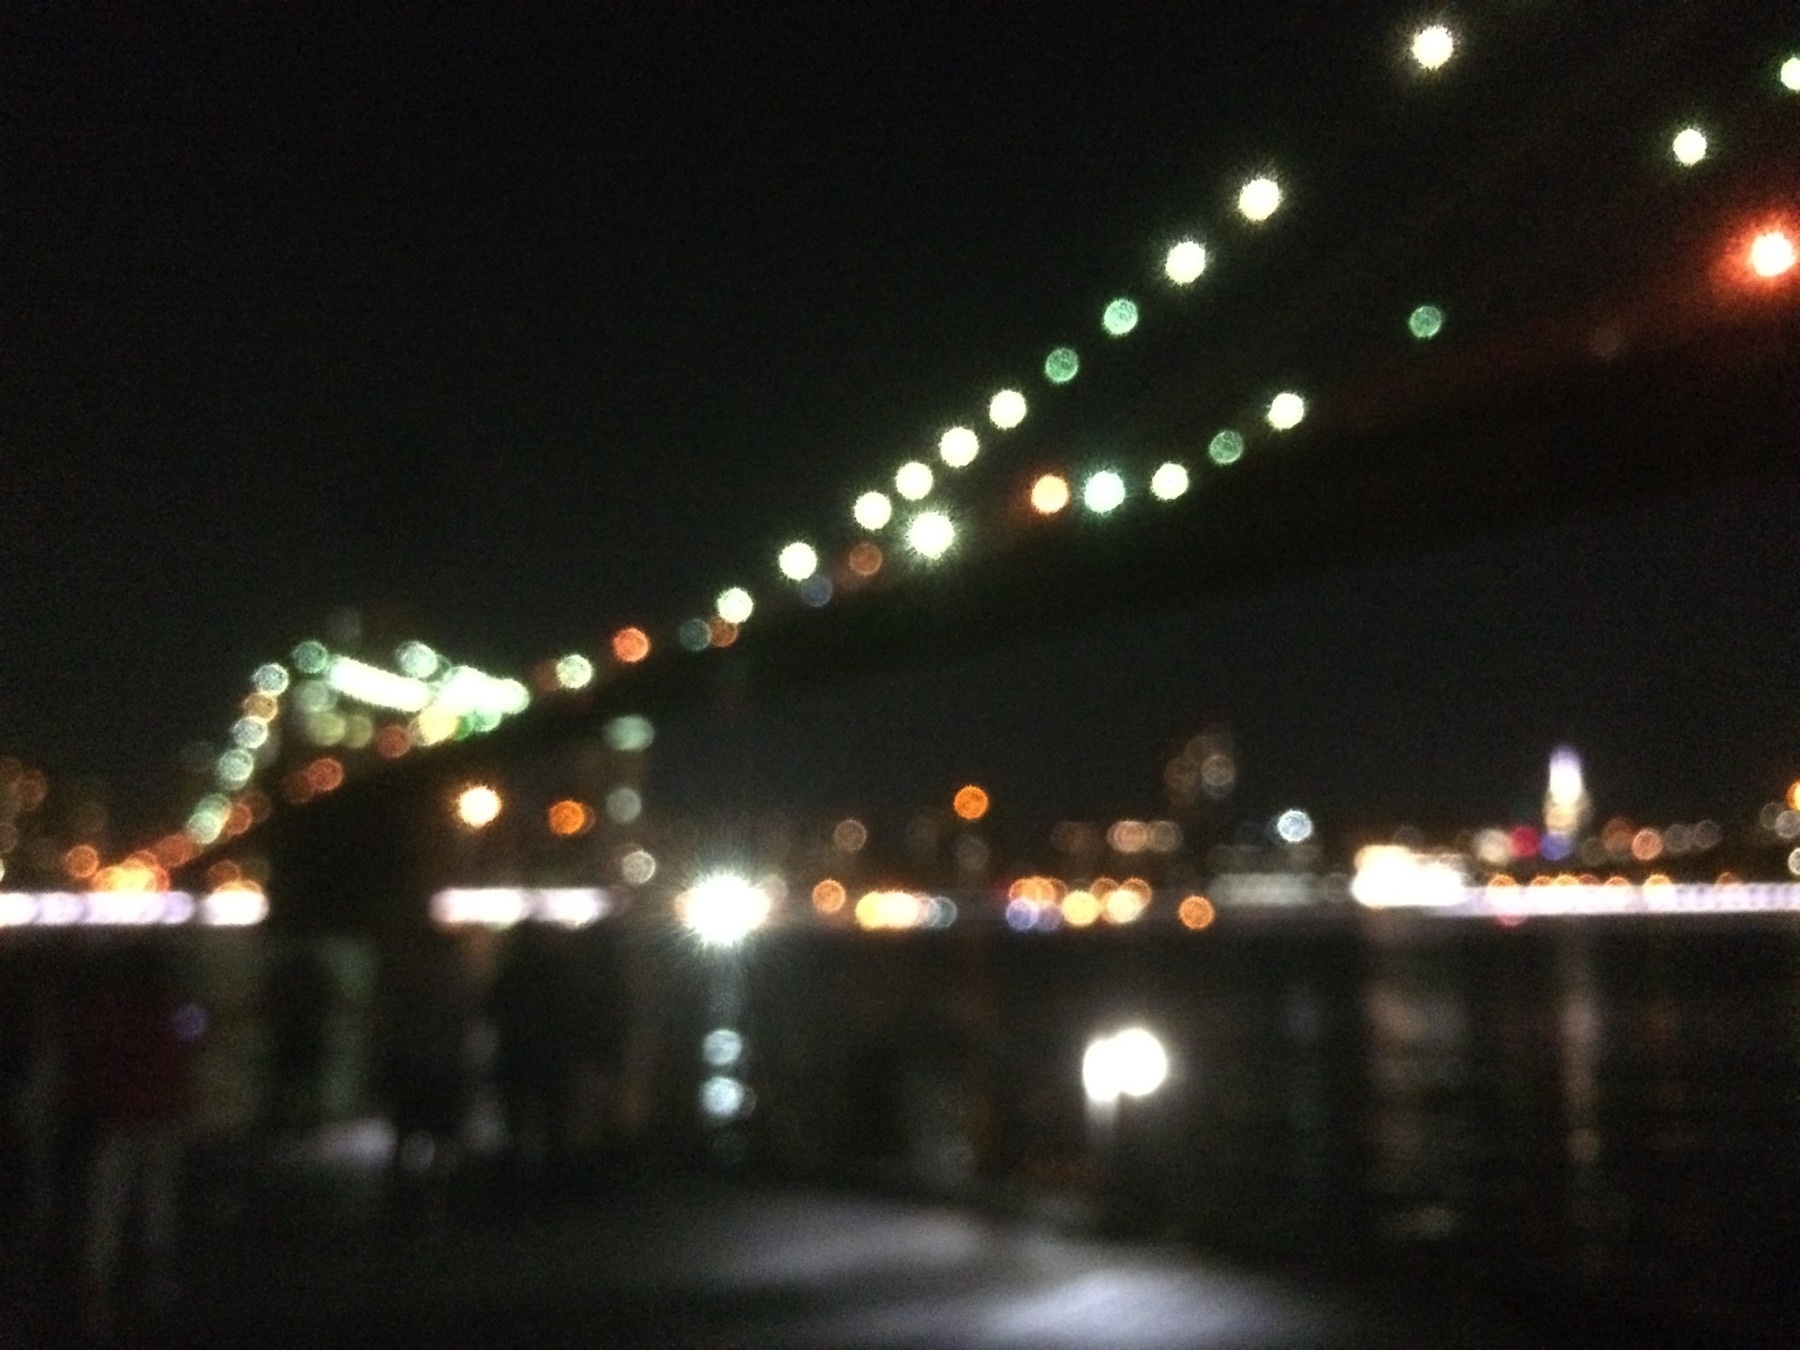 Blurry picture of a bridge over a river in new york.